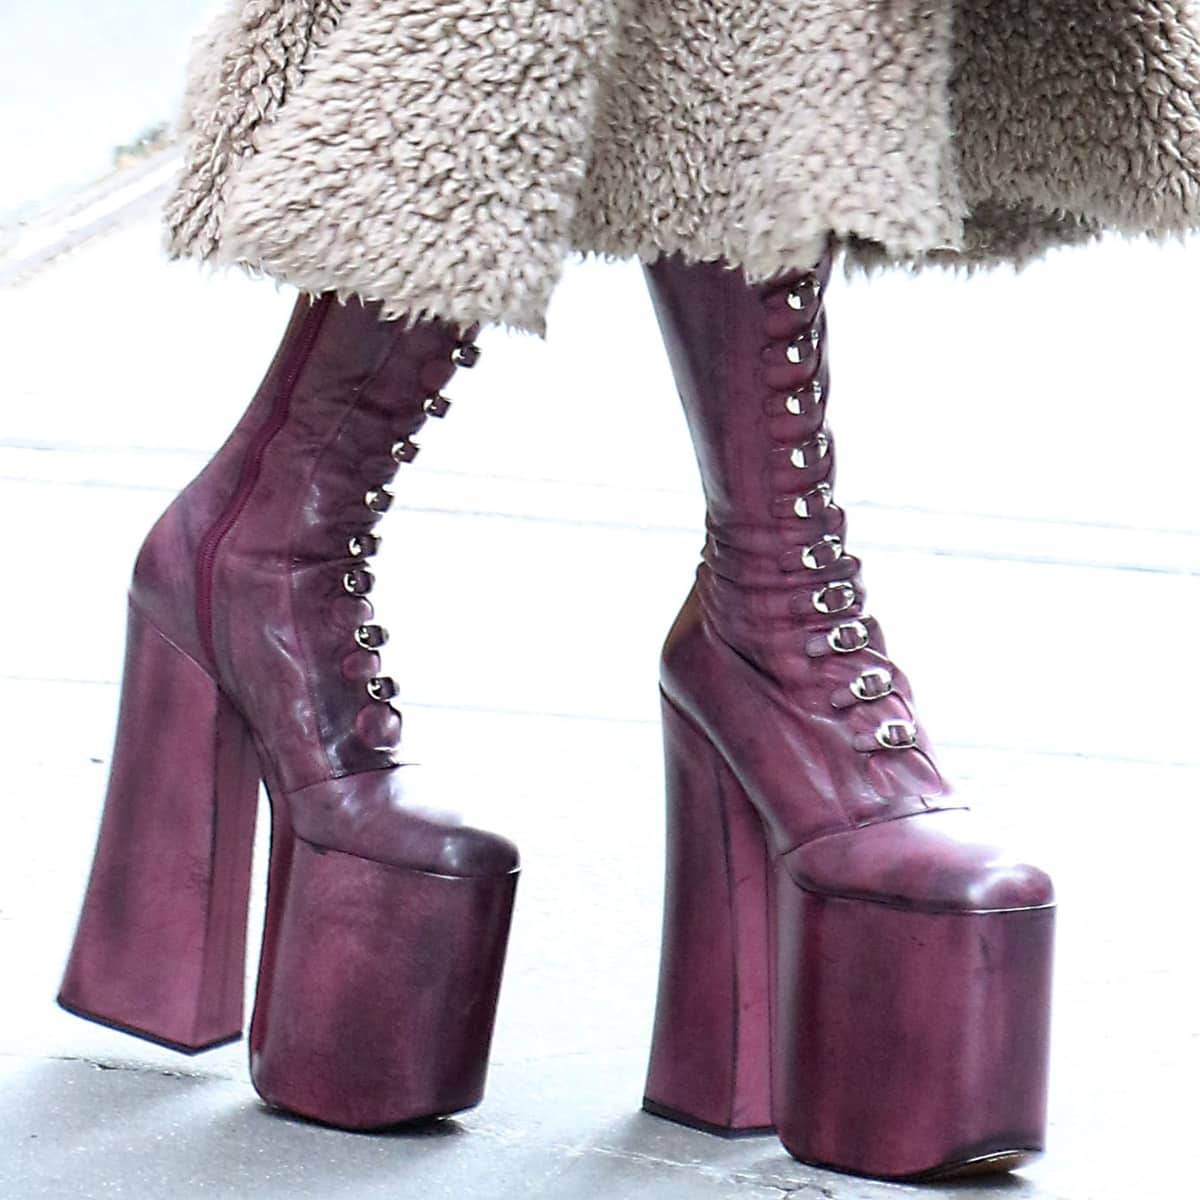 Taraji P. Henson turned heads with 8-inch purple platform boots by Marc Jacobs